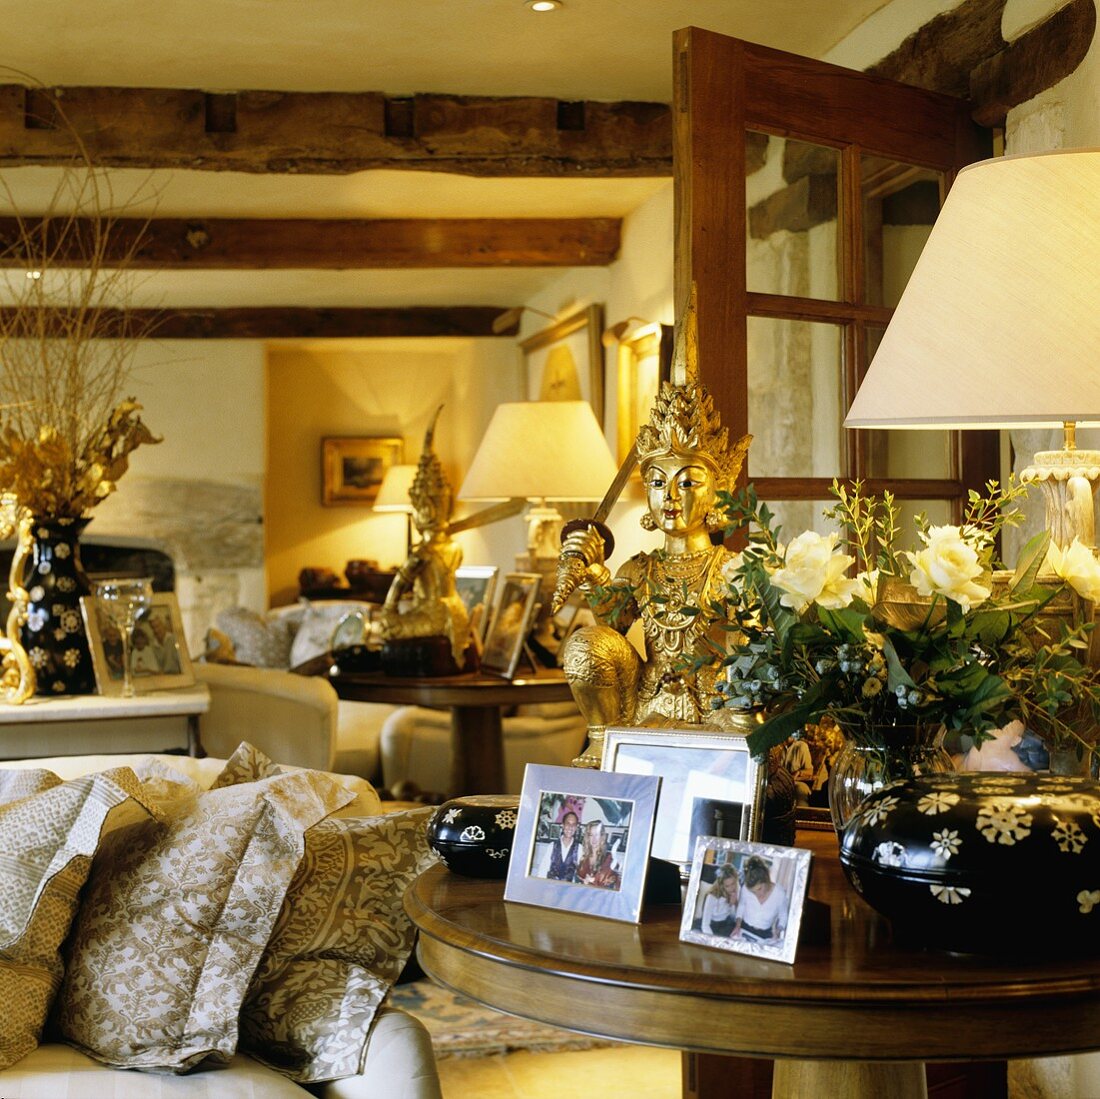 A living room in a country house with a rustic wood beam ceiling and an occasional table with photos and Oriental brass figures